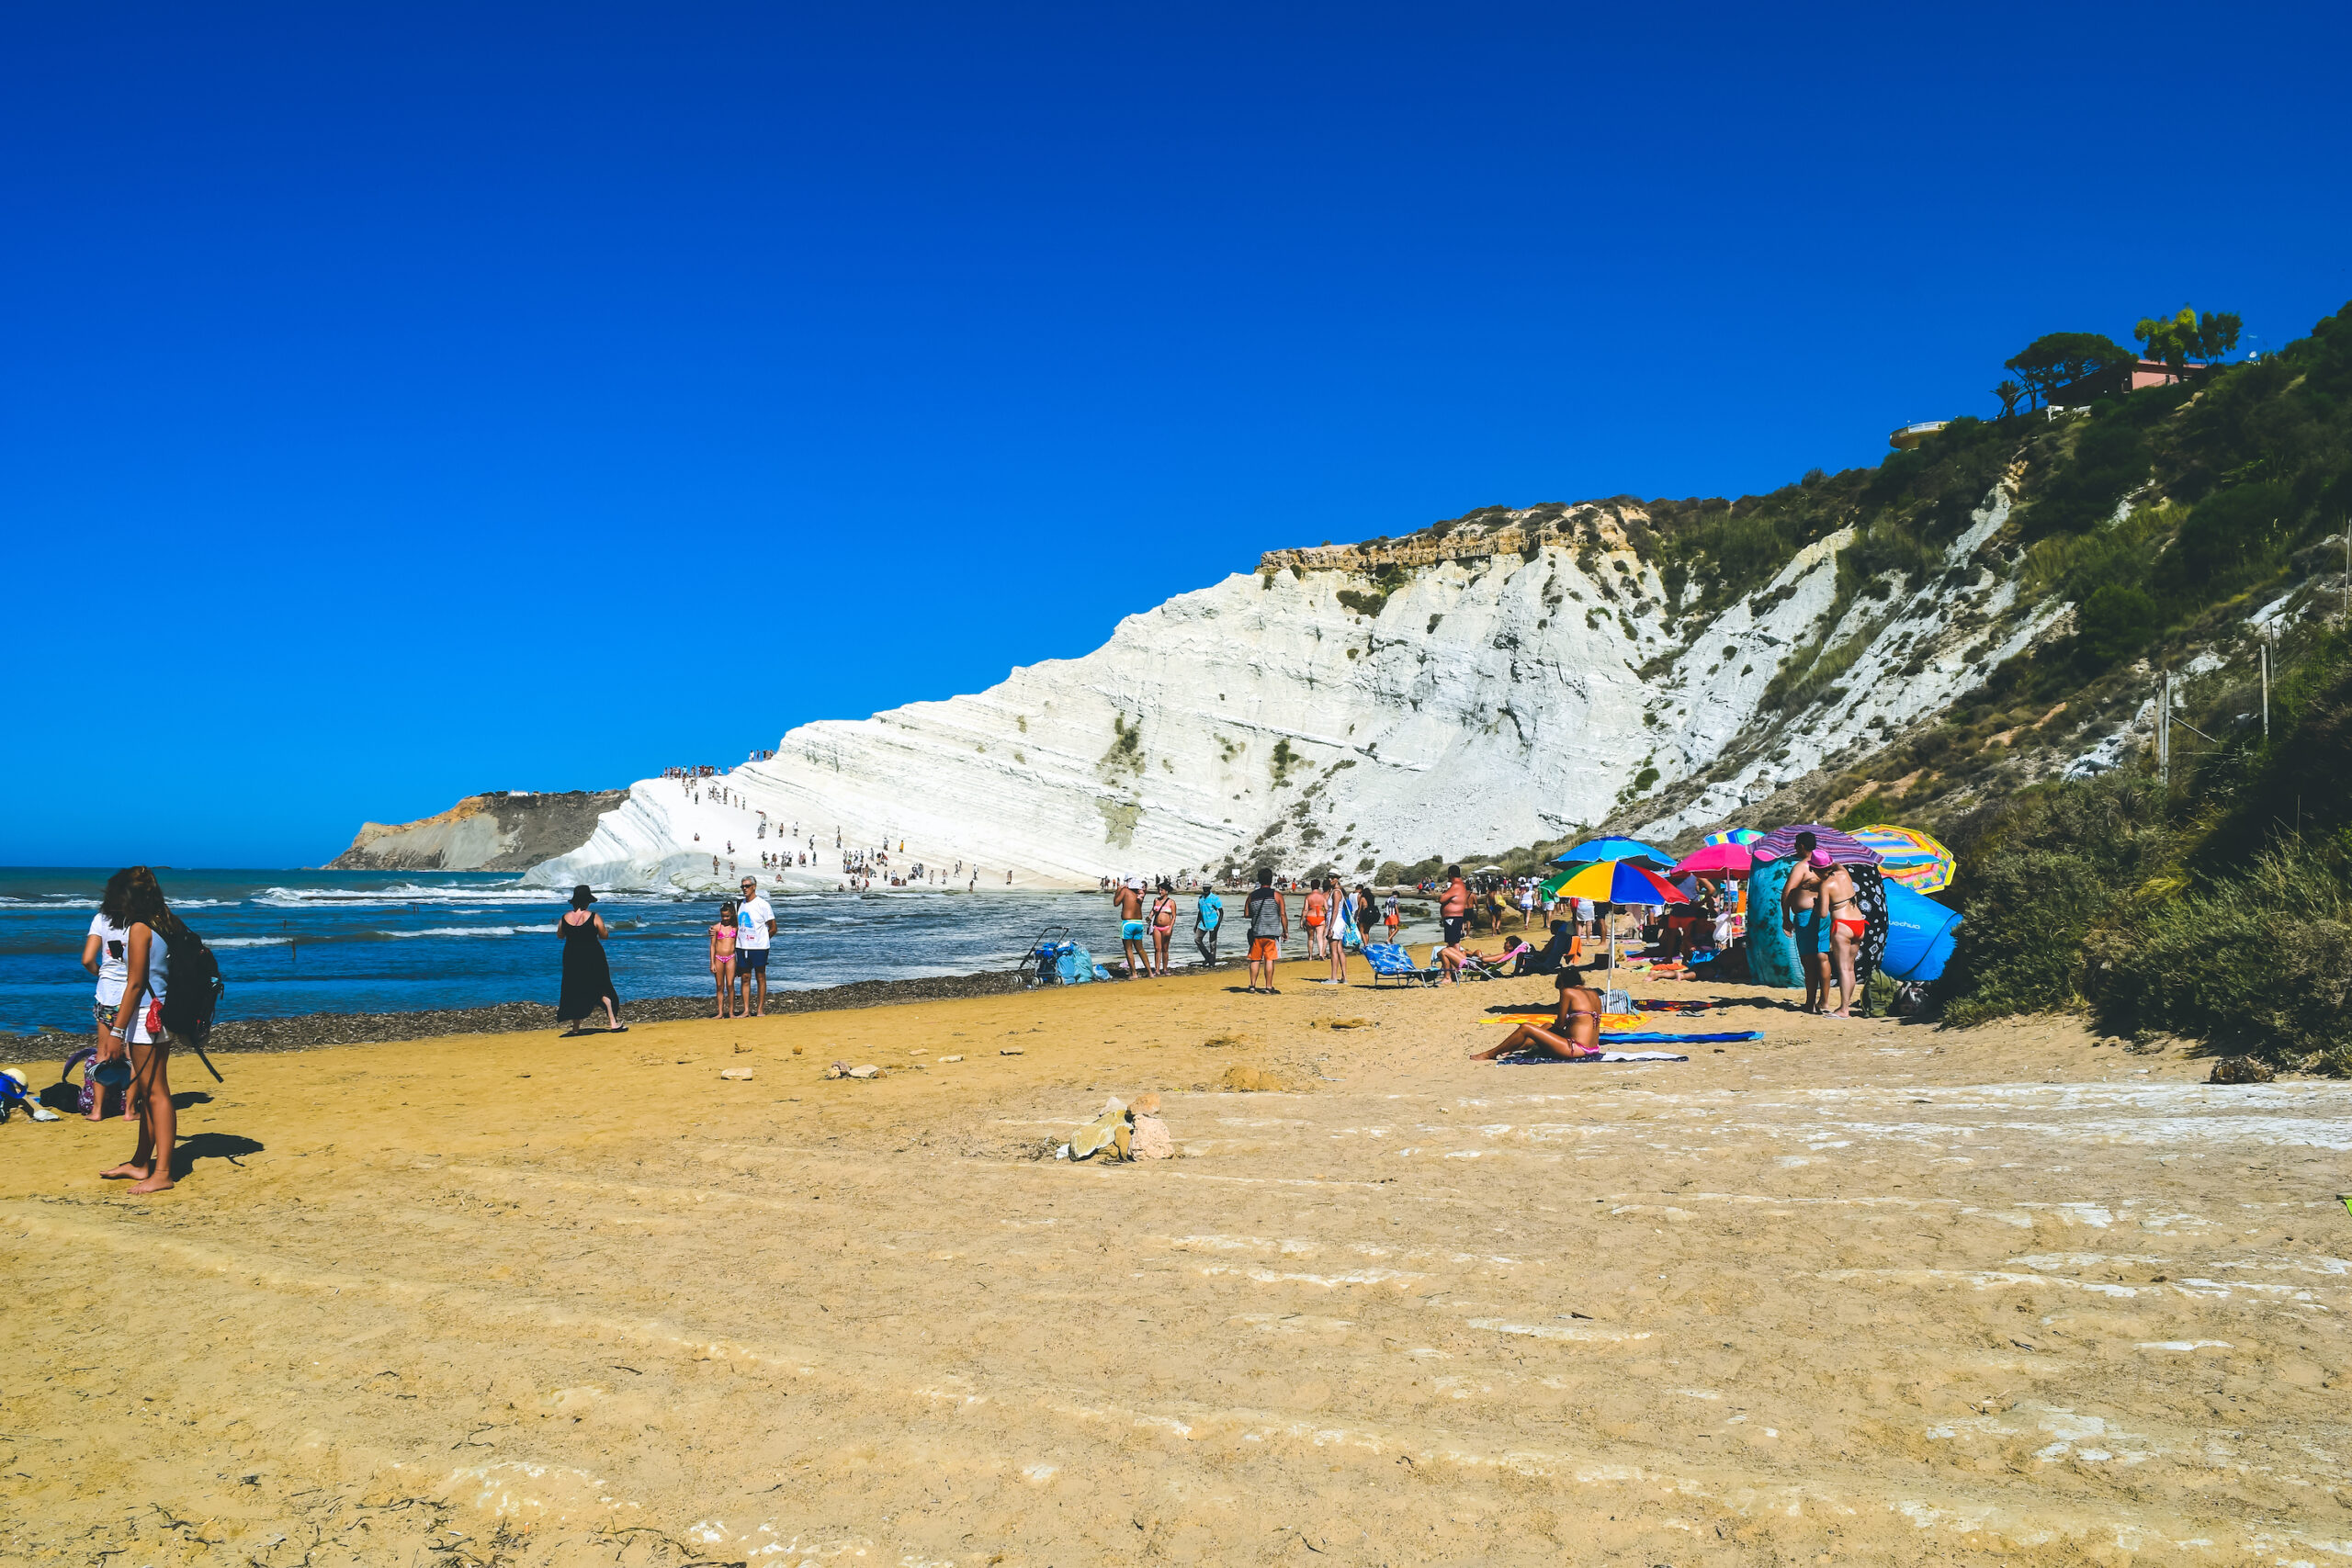 Travel guide to sicily scala dei turchi agrigento what to do see italy best time of year-1